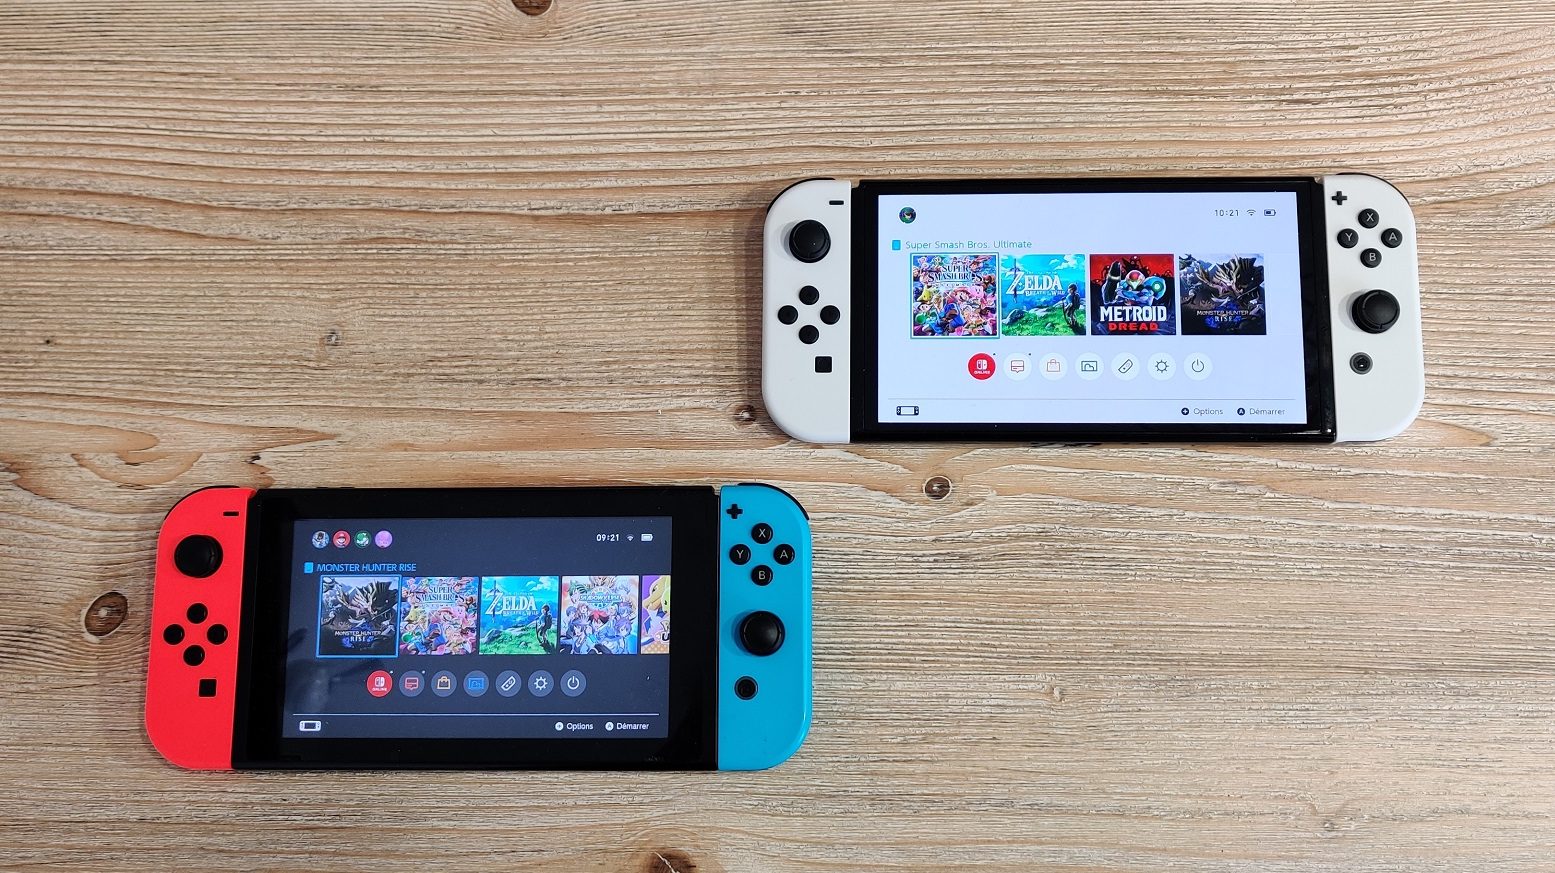 How to transfer data to new Nintendo Switch?